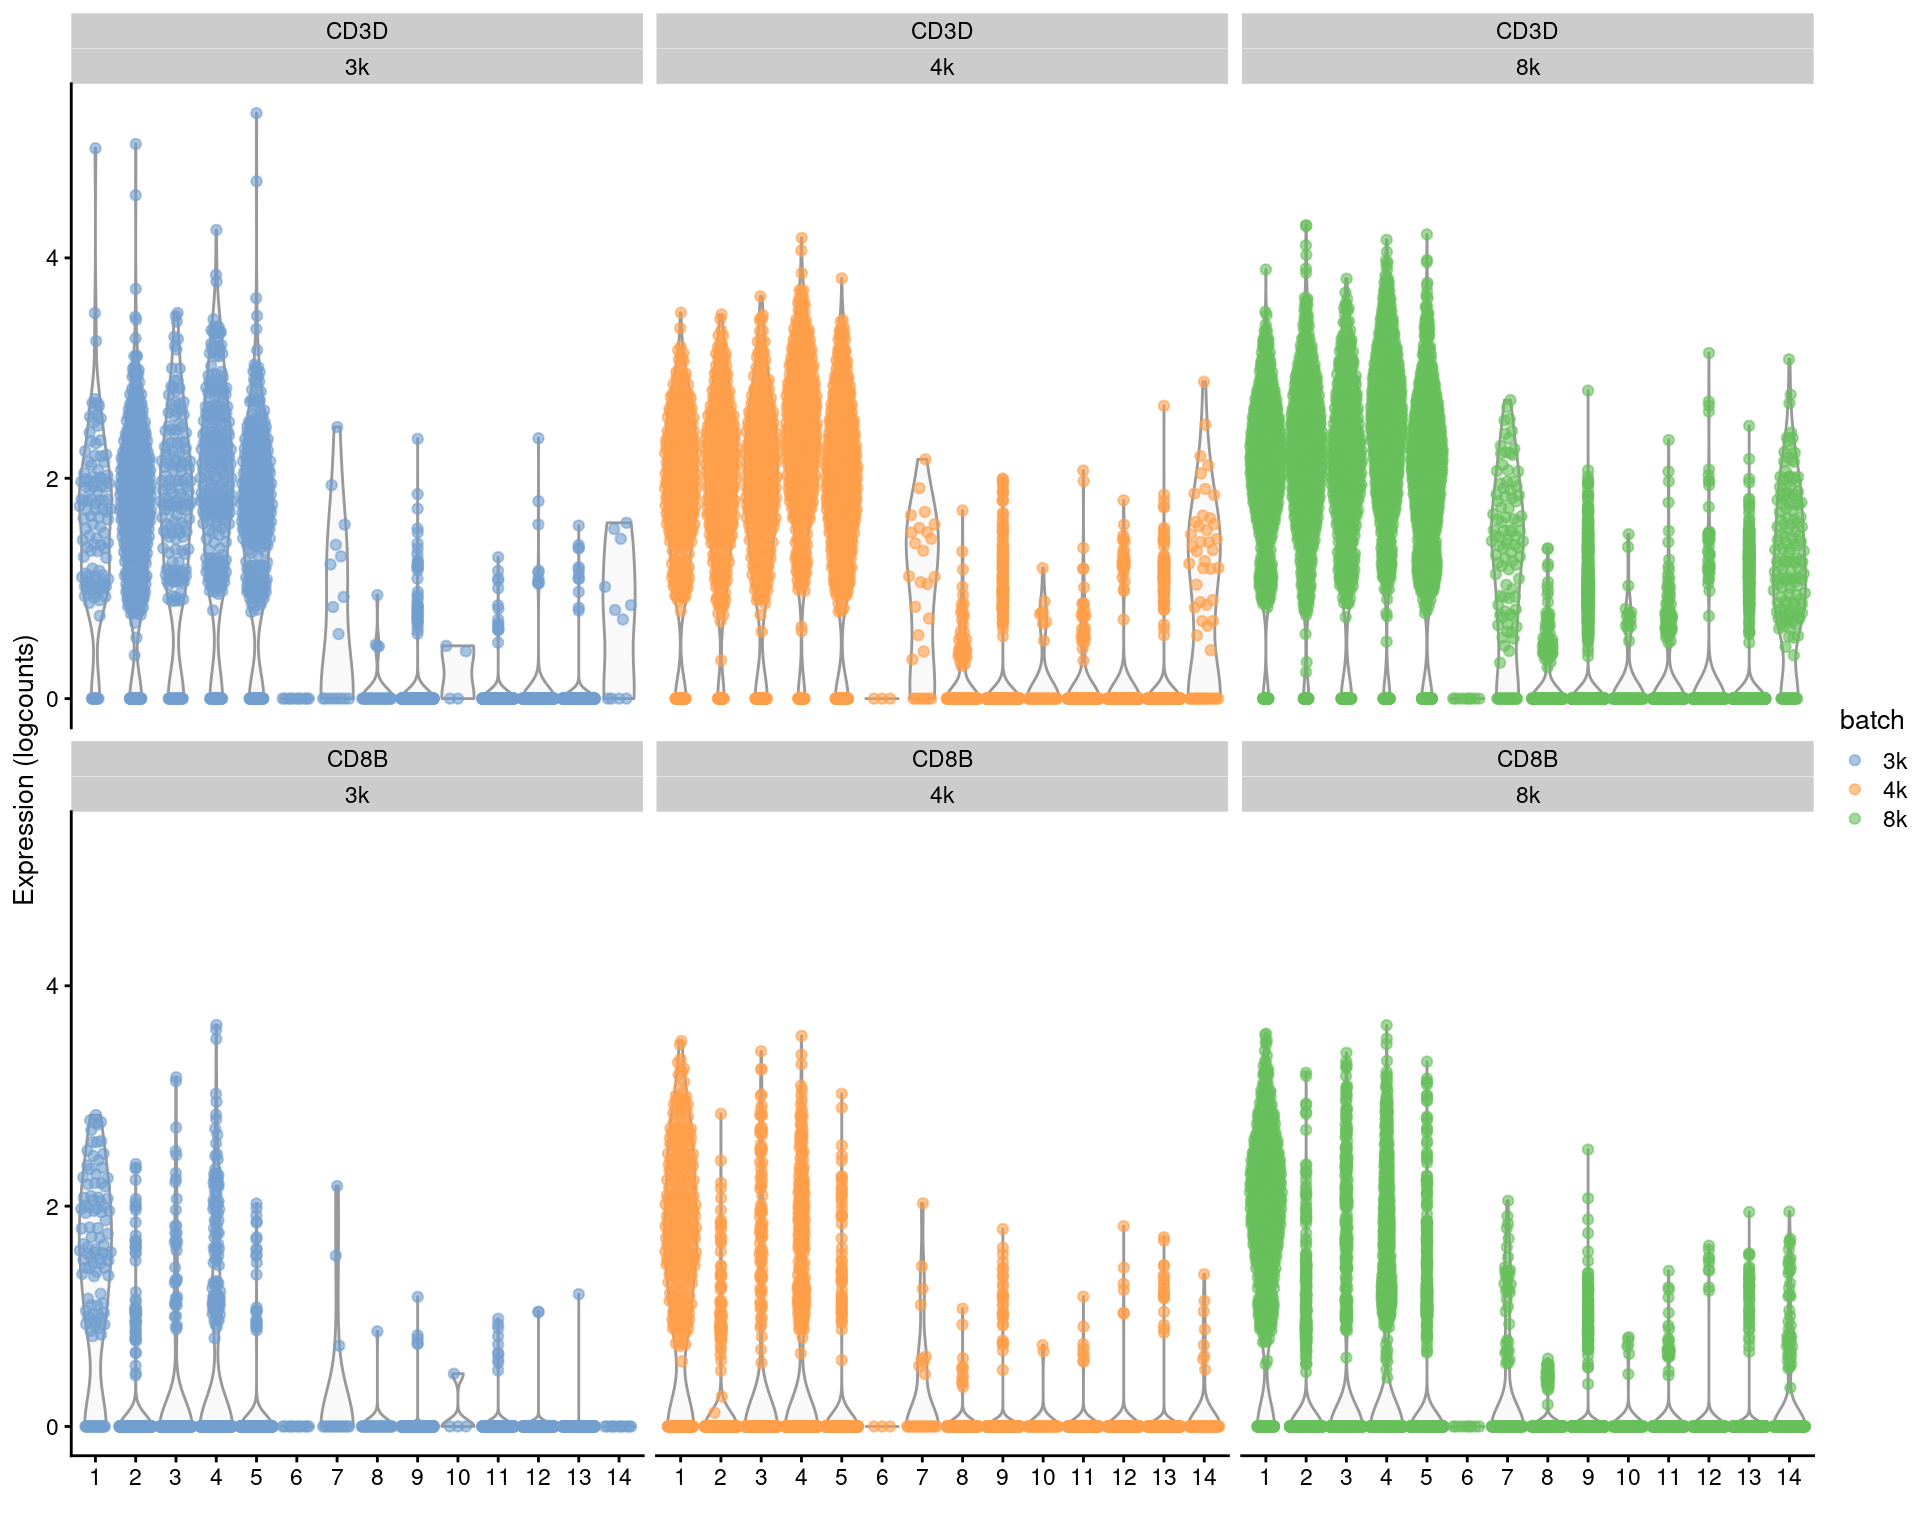 Distributions of uncorrected log-expression values for _CD8B_ and _CD3D_ within each cluster in each batch of the merged PBMC dataset.